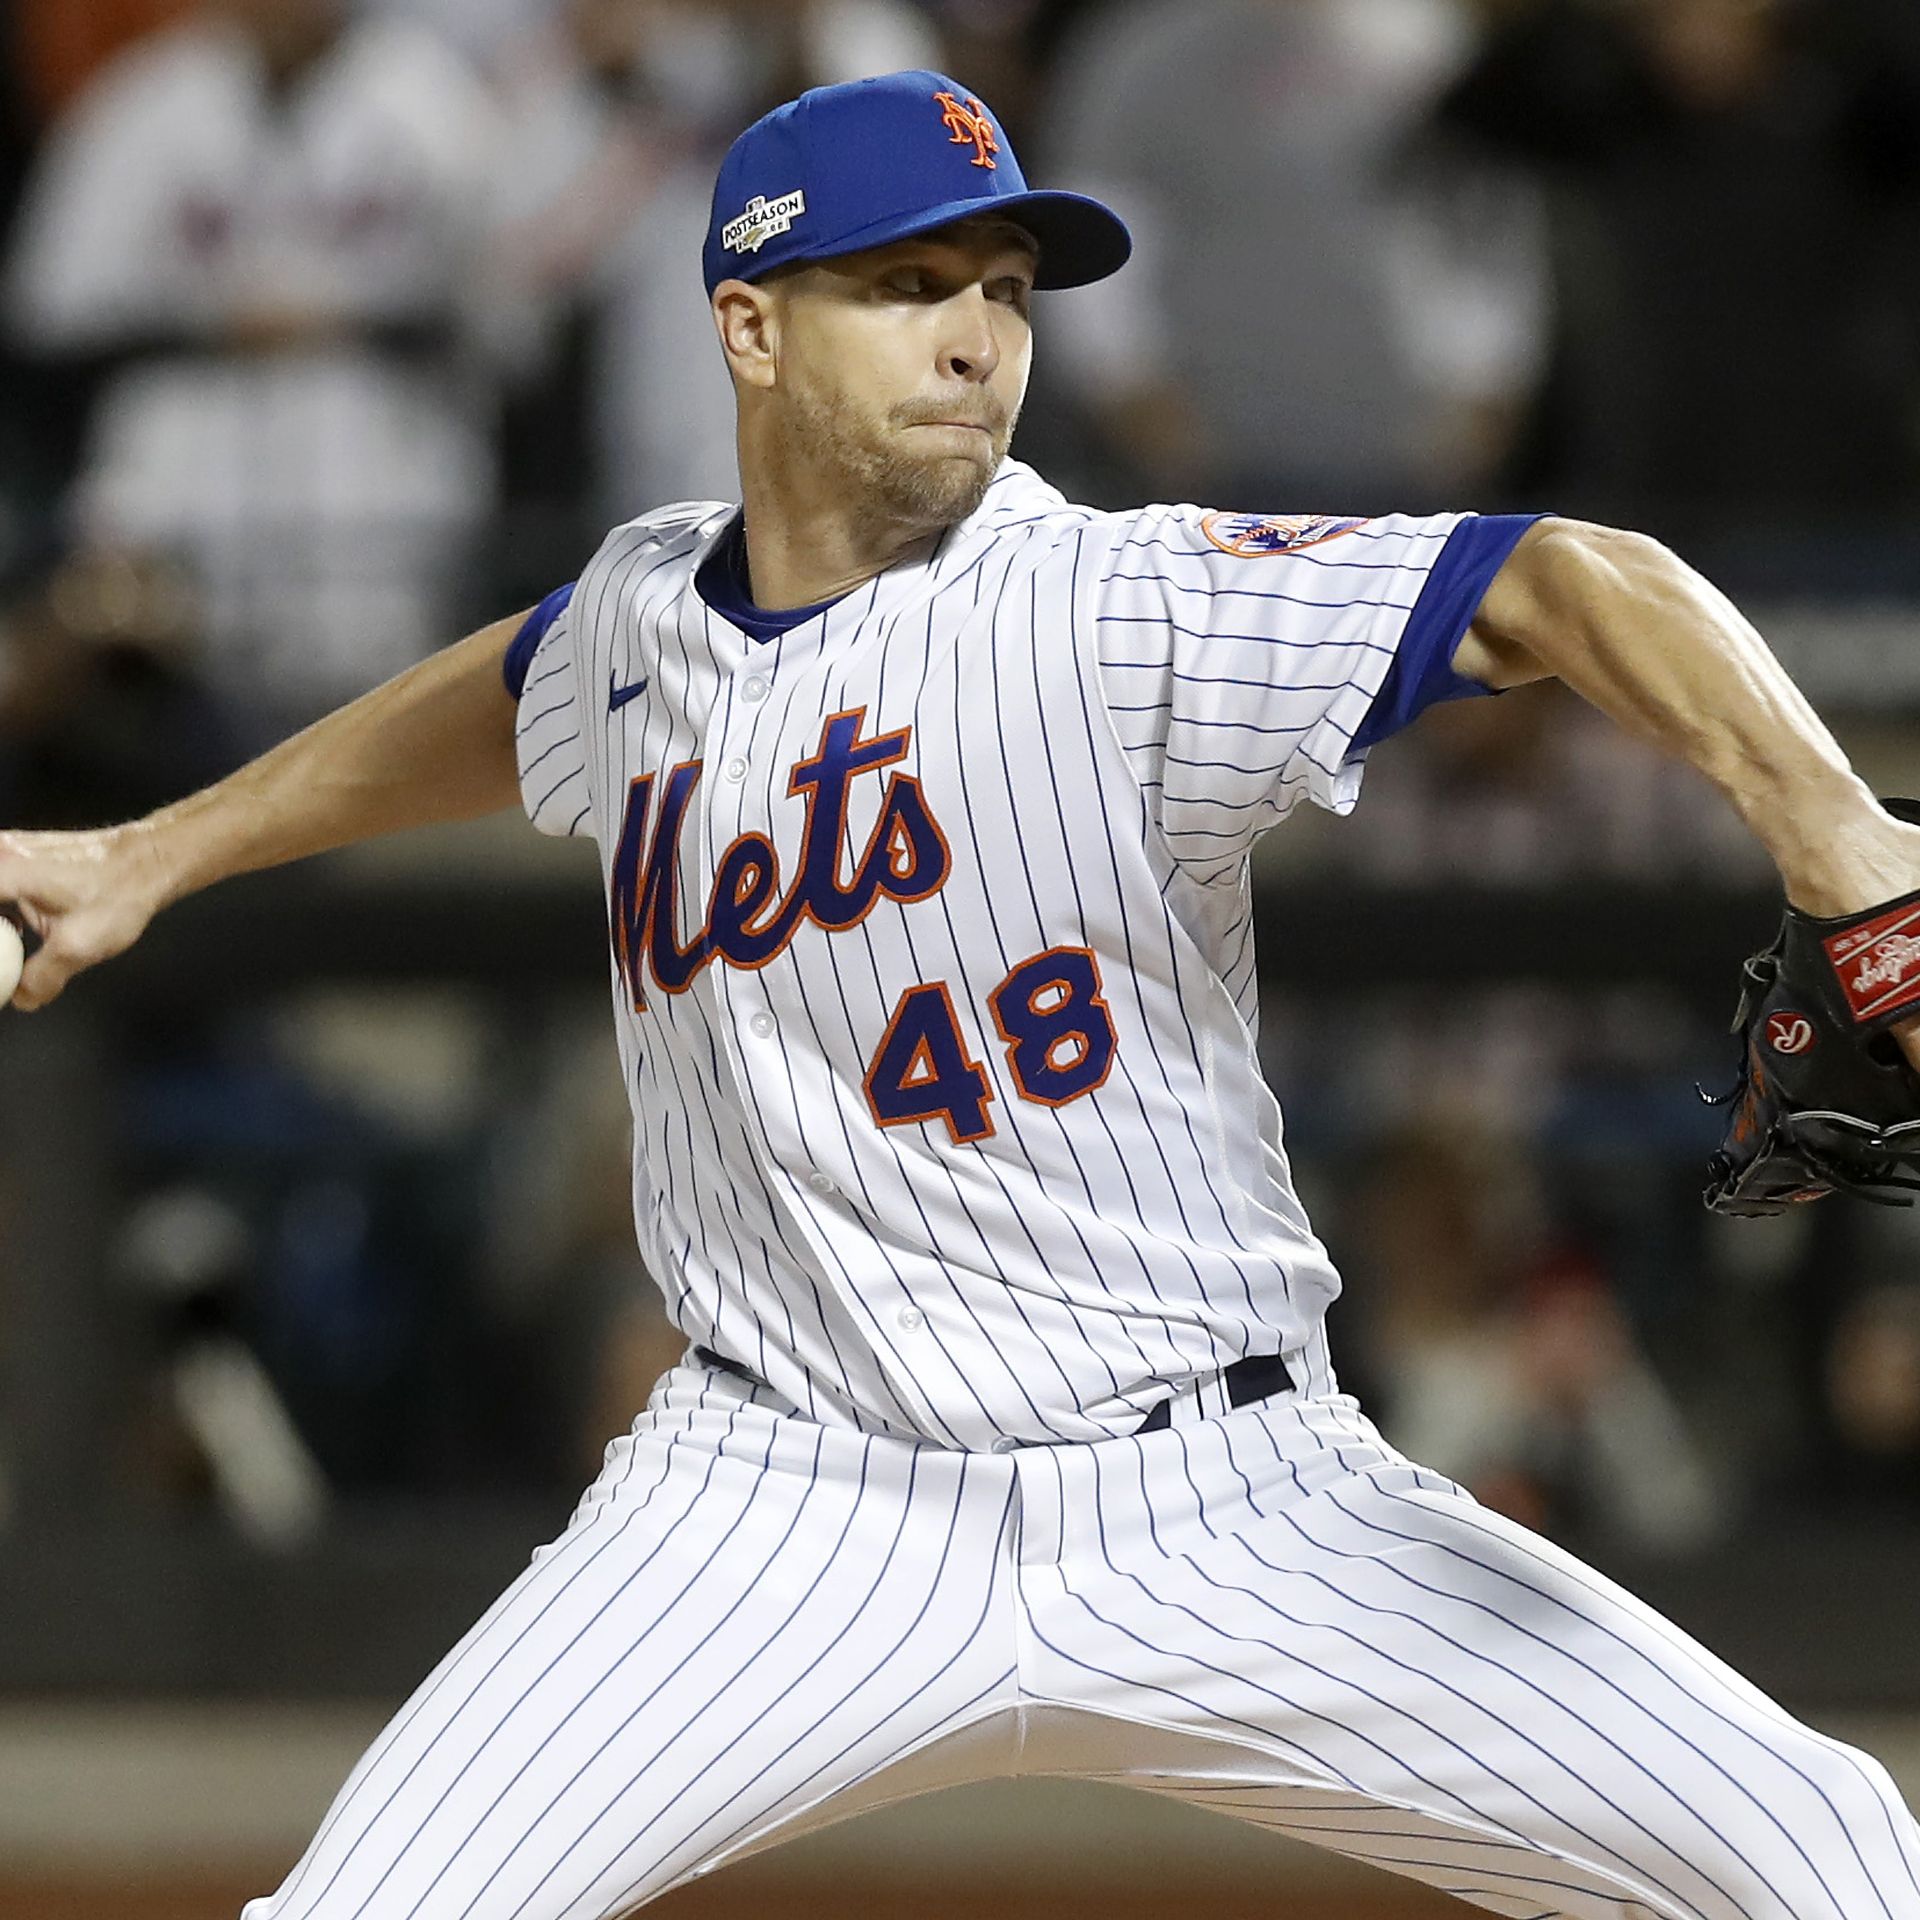 Jacob deGrom Signs $185 Million Deal With Texas Rangers - The New York Times